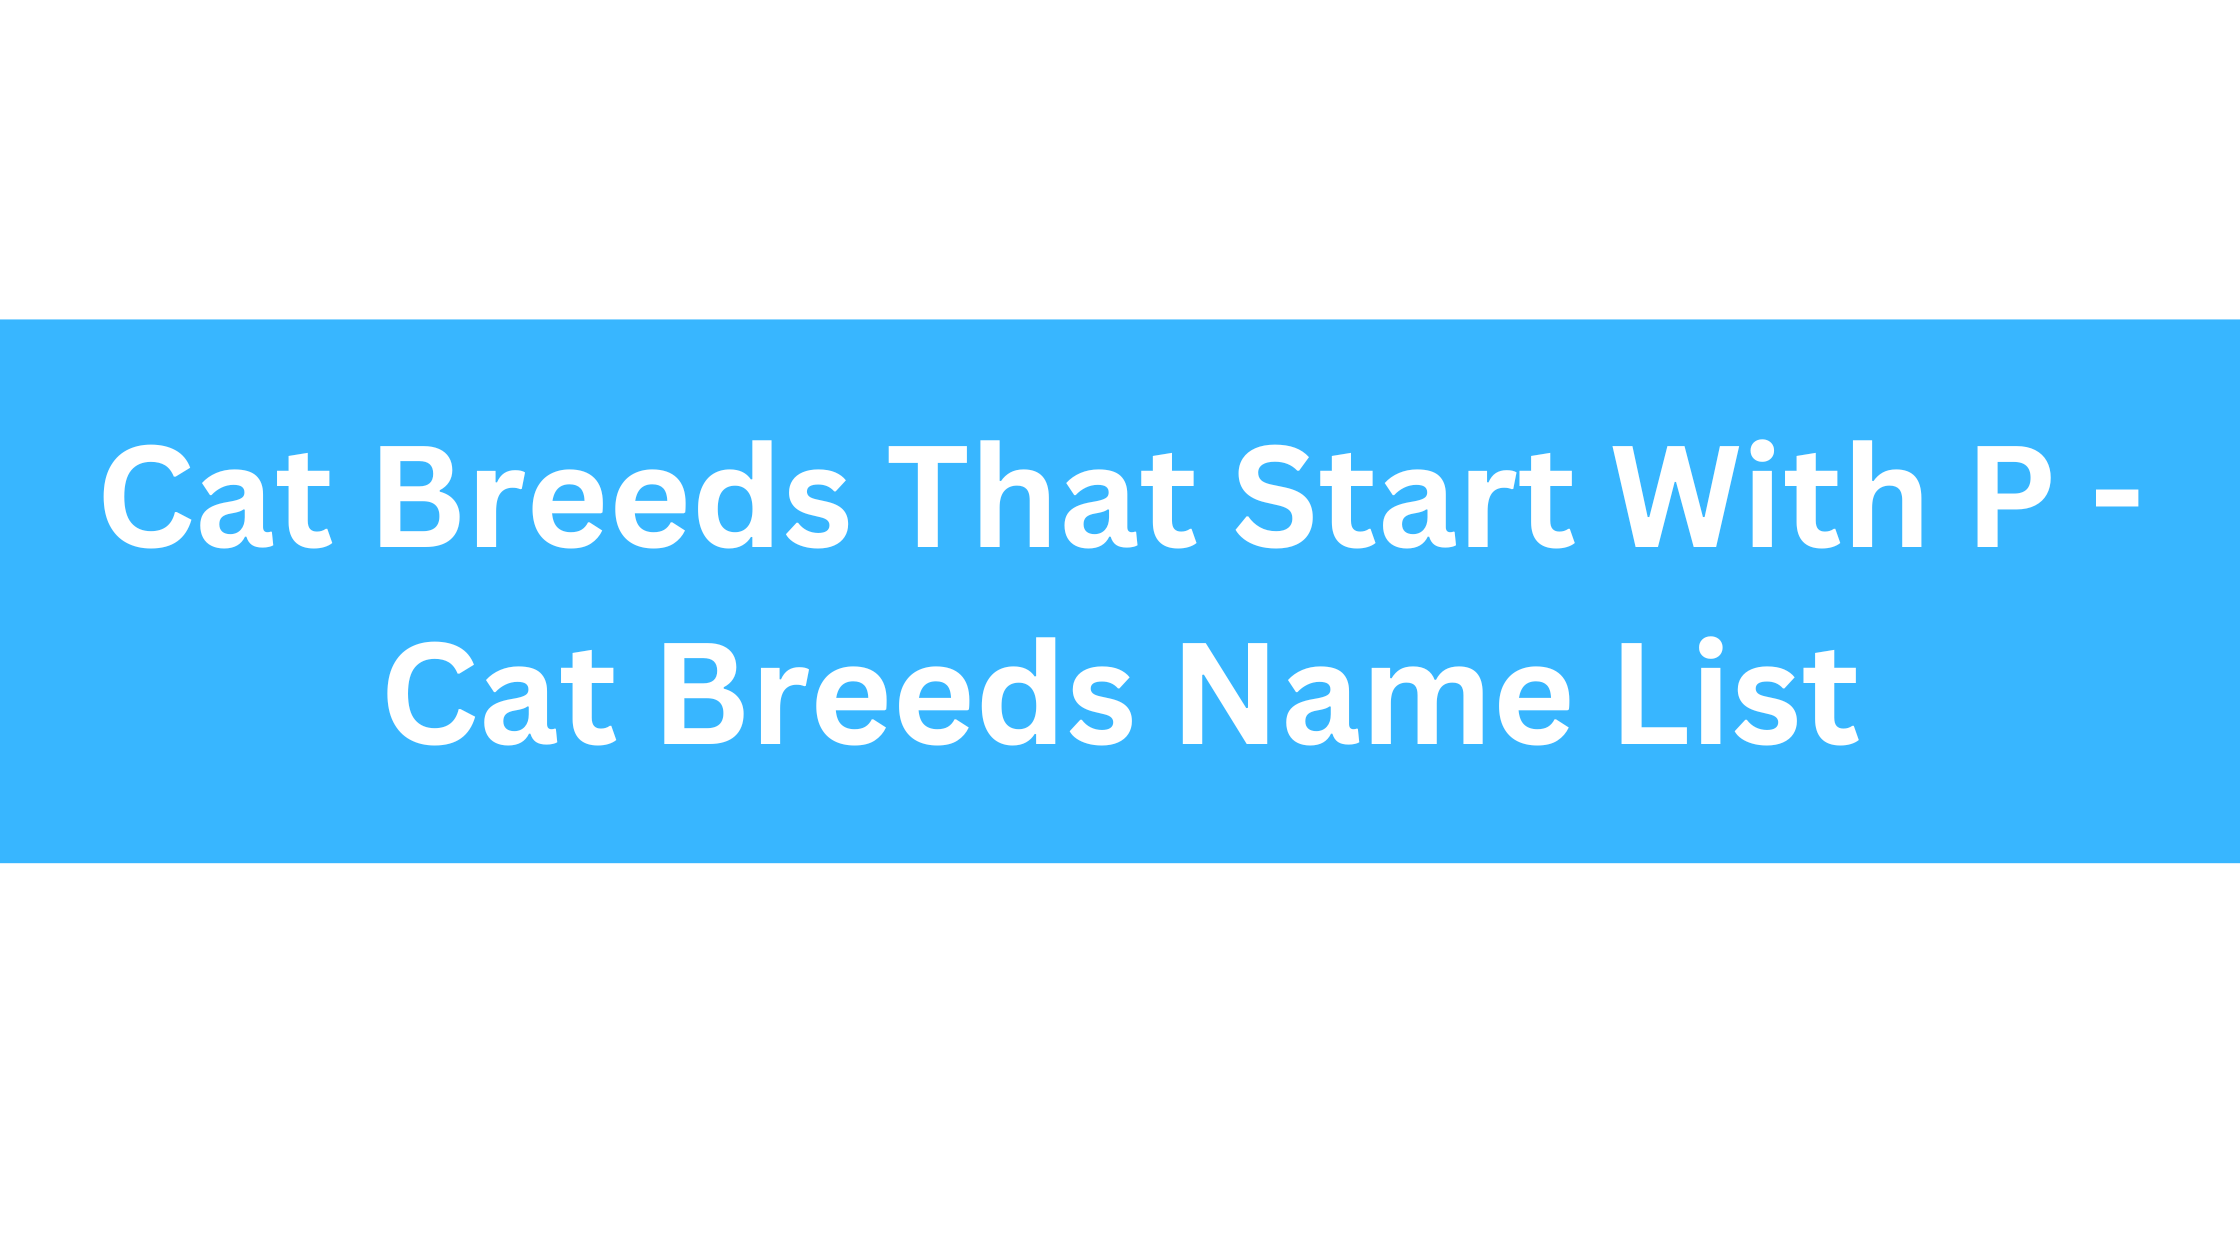 Cat Breeds That Start With P